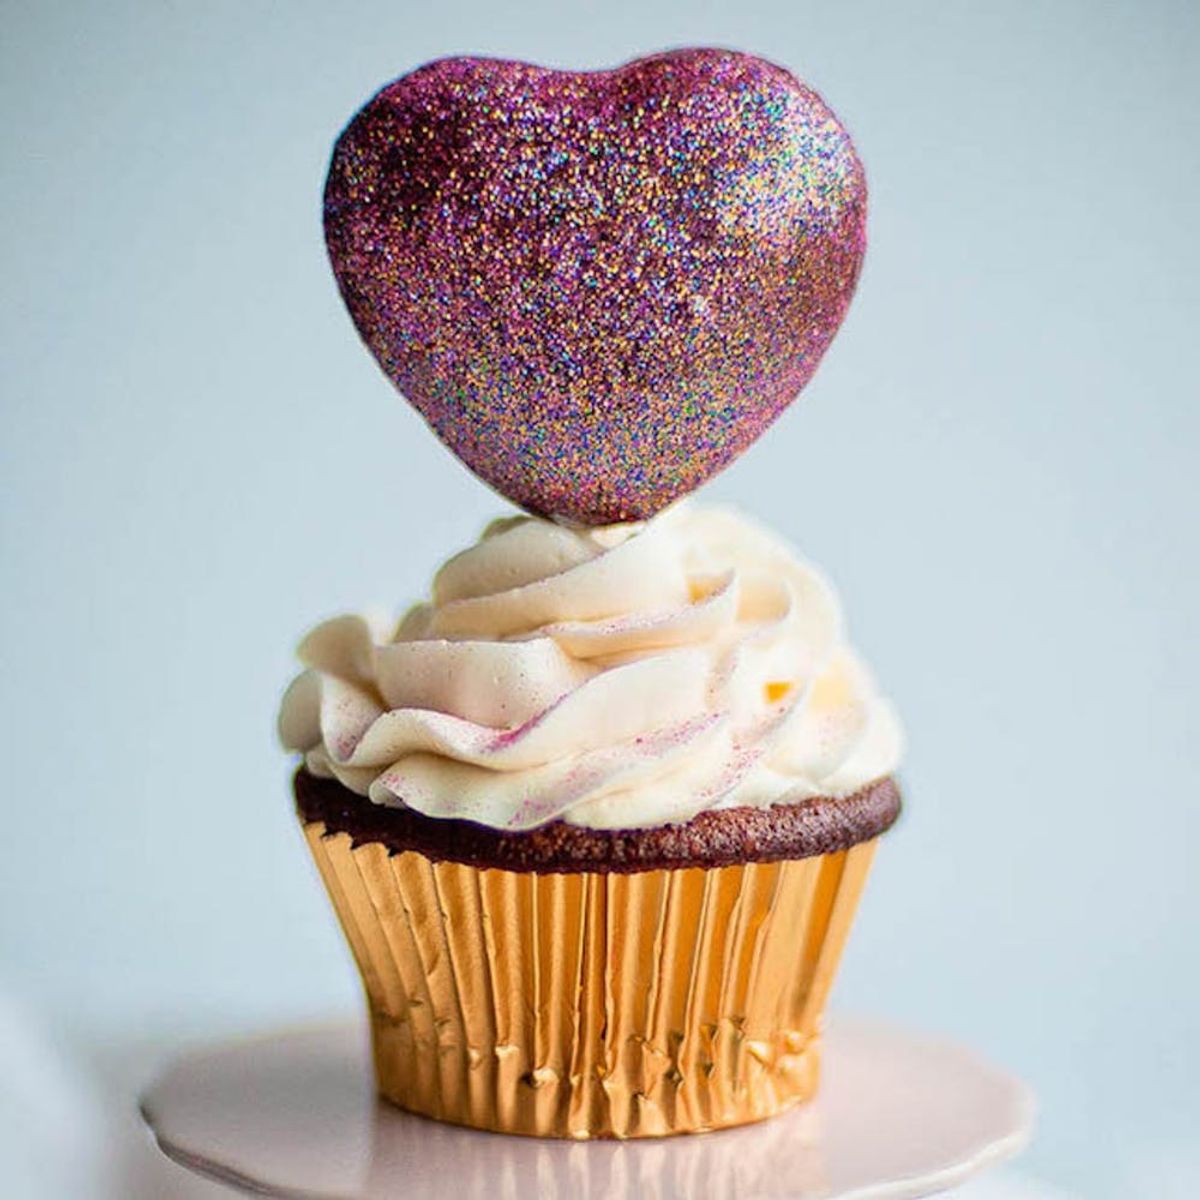 15 Glitter Recipes Sure to Make Your Day Sparkle